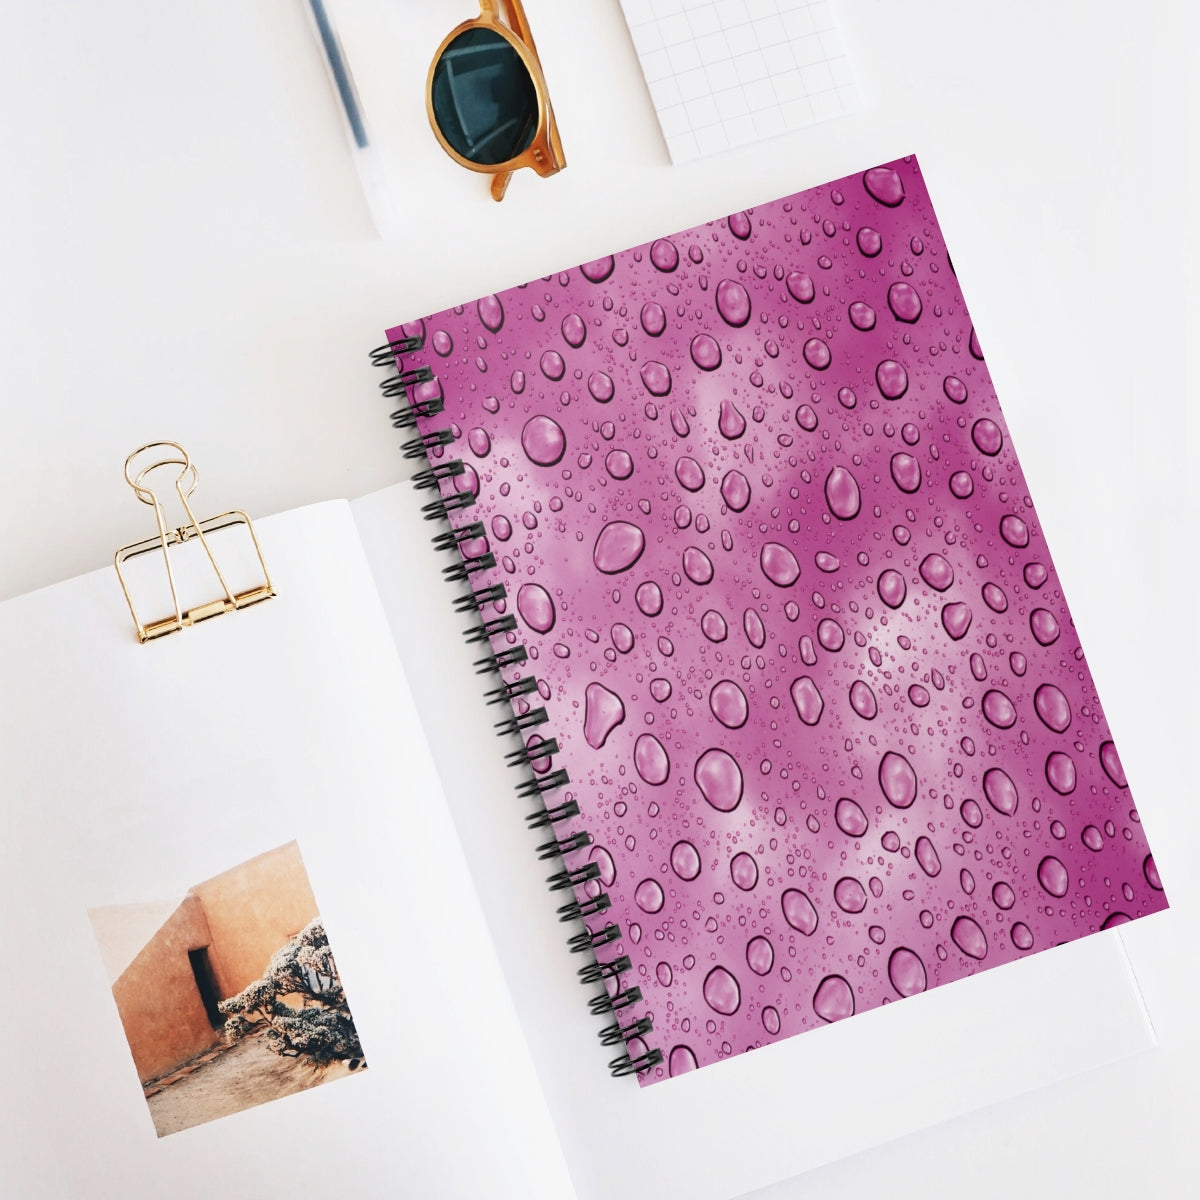 Bright Pink Water Droplets Spiral Ruled Line Notebook